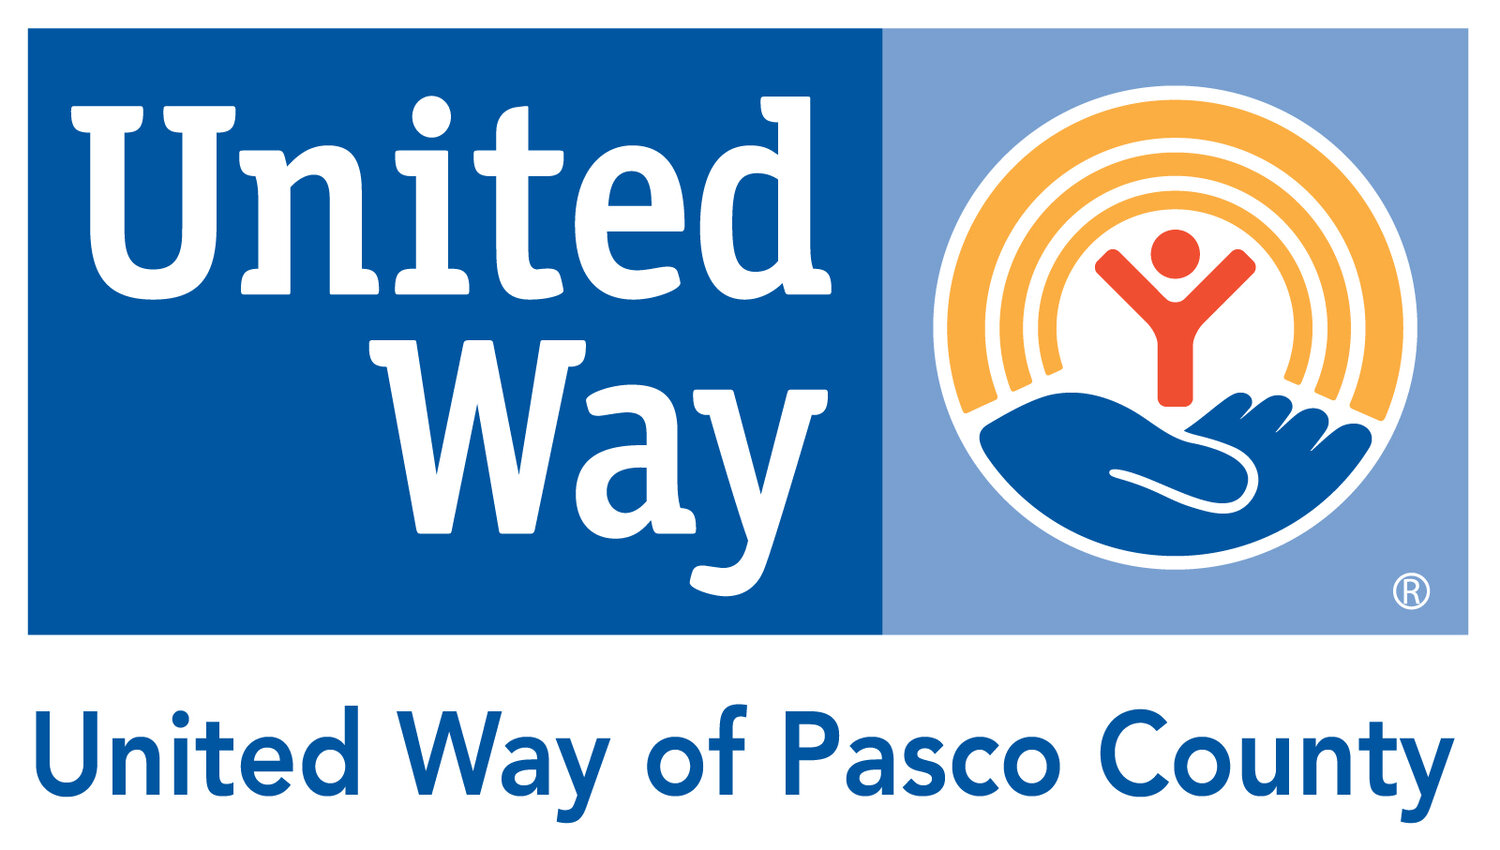 United Way of Pasco County